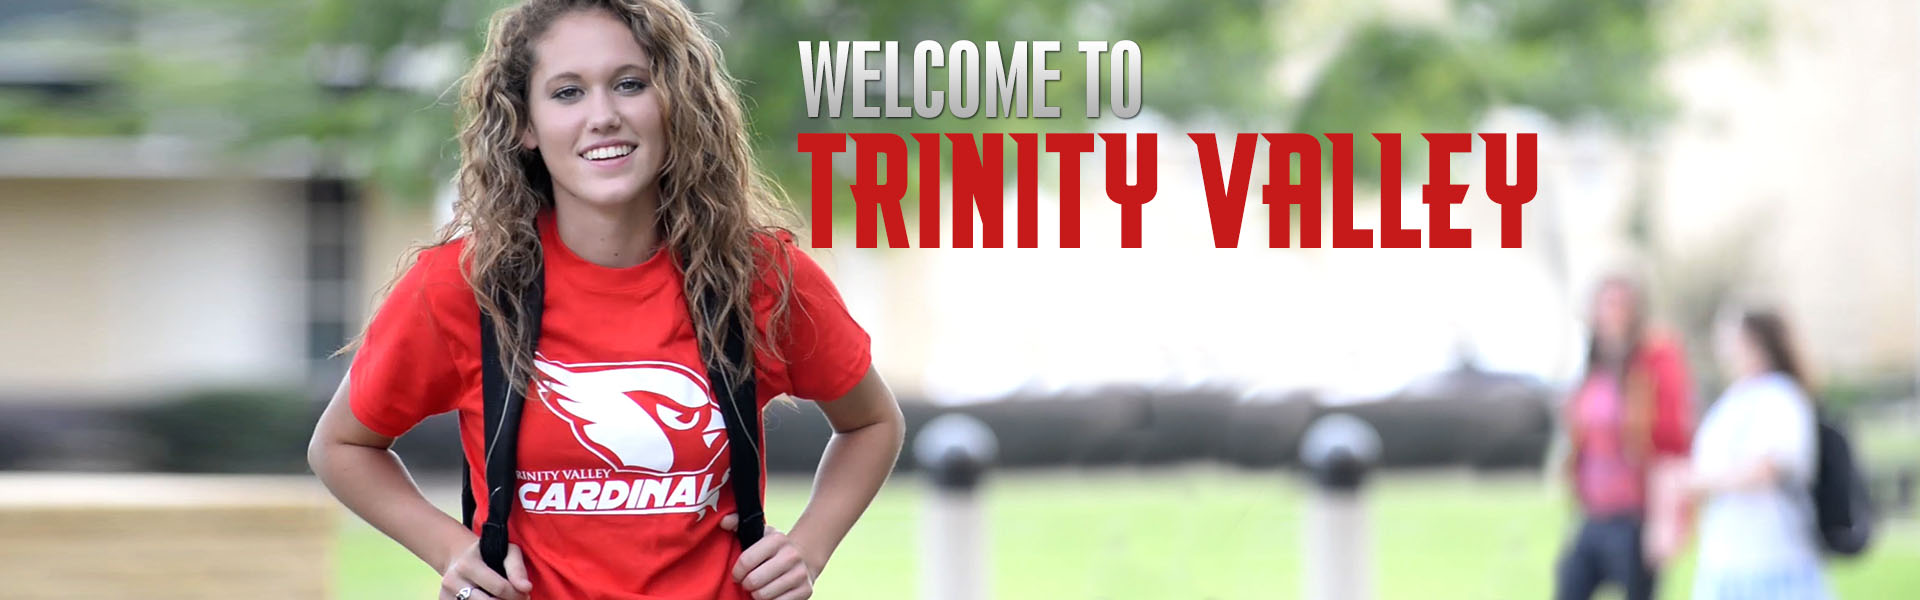 Welcome to Trinity Valley